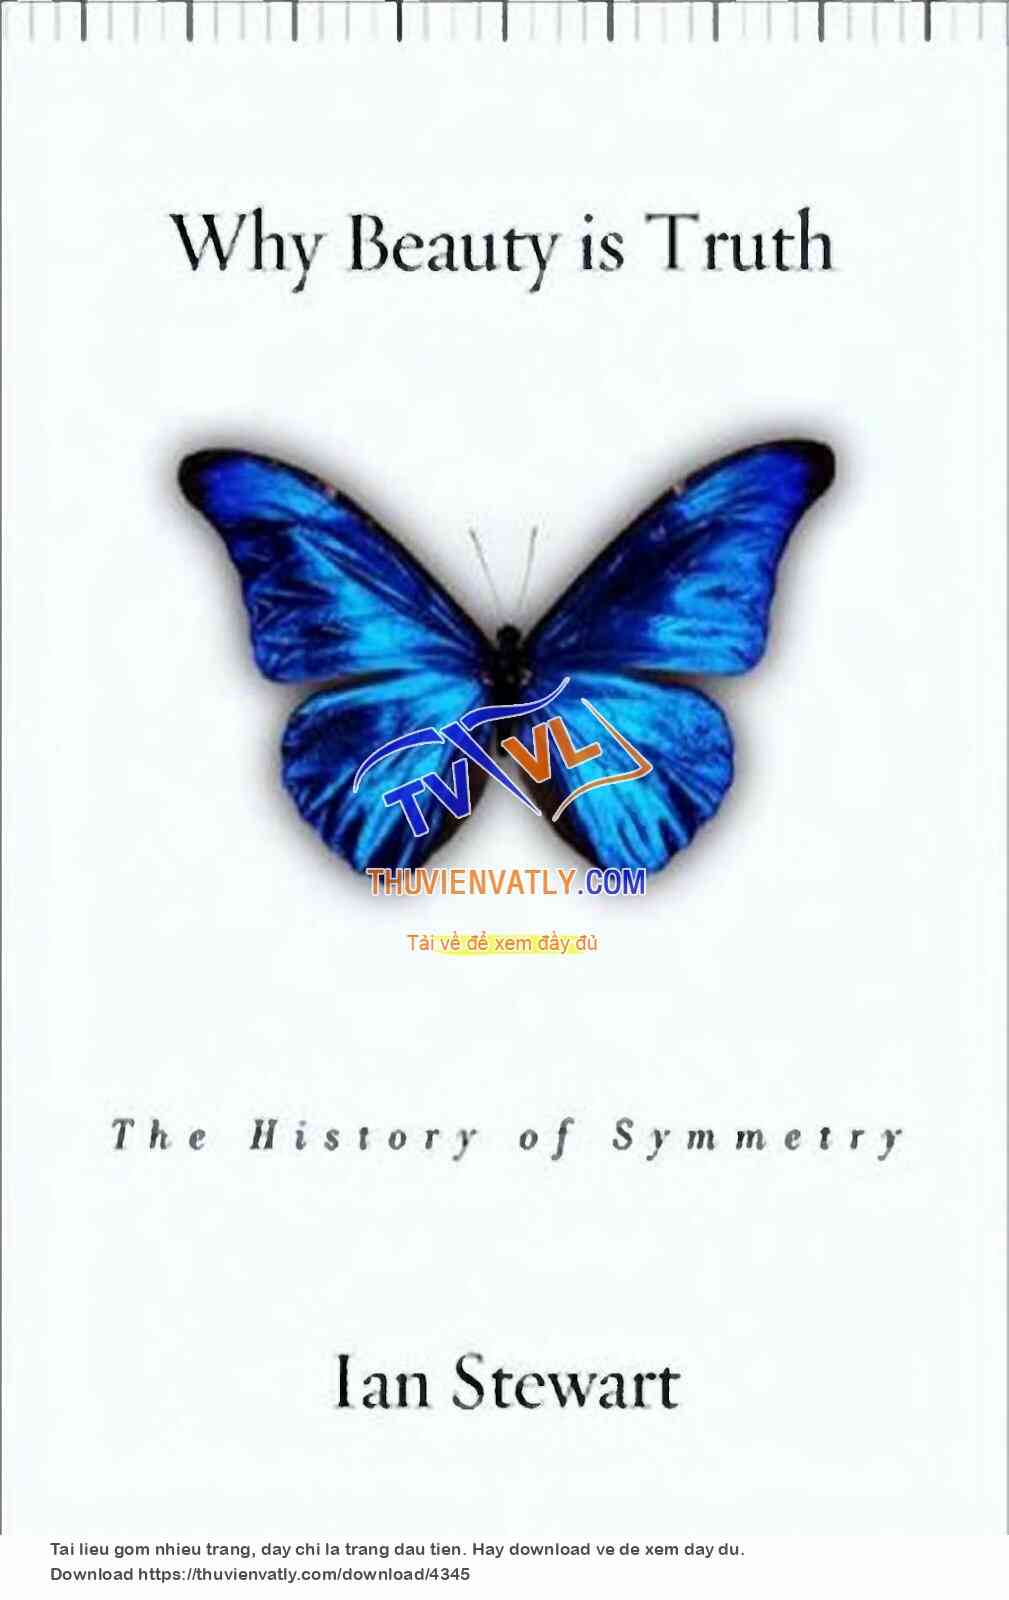 Why Beauty is Truth - The Story of Symmetry